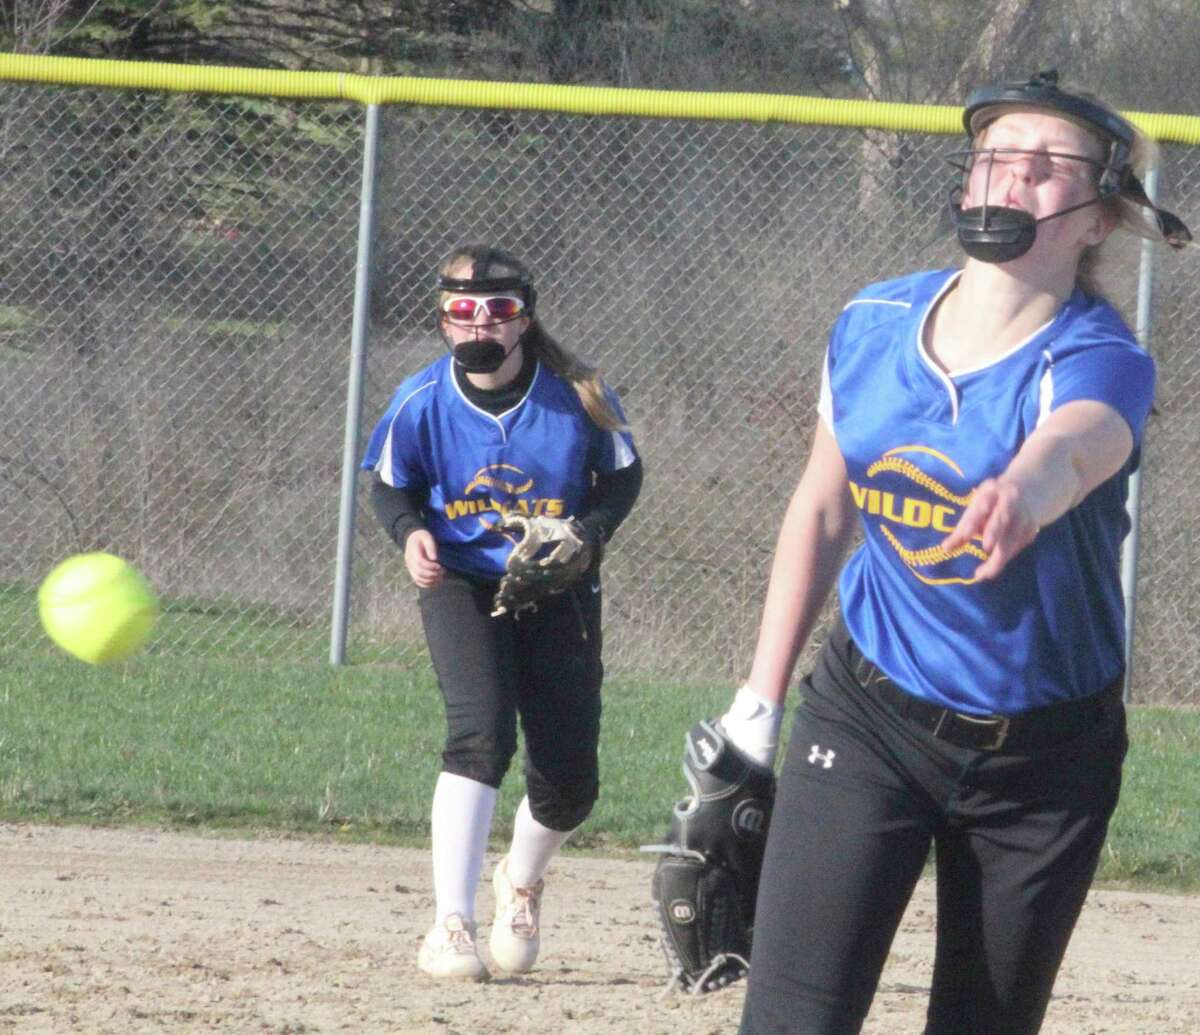 Evart's Addy Gray delivers a pitch against Big Rapids early in the softball season. (Pioneer file photo)